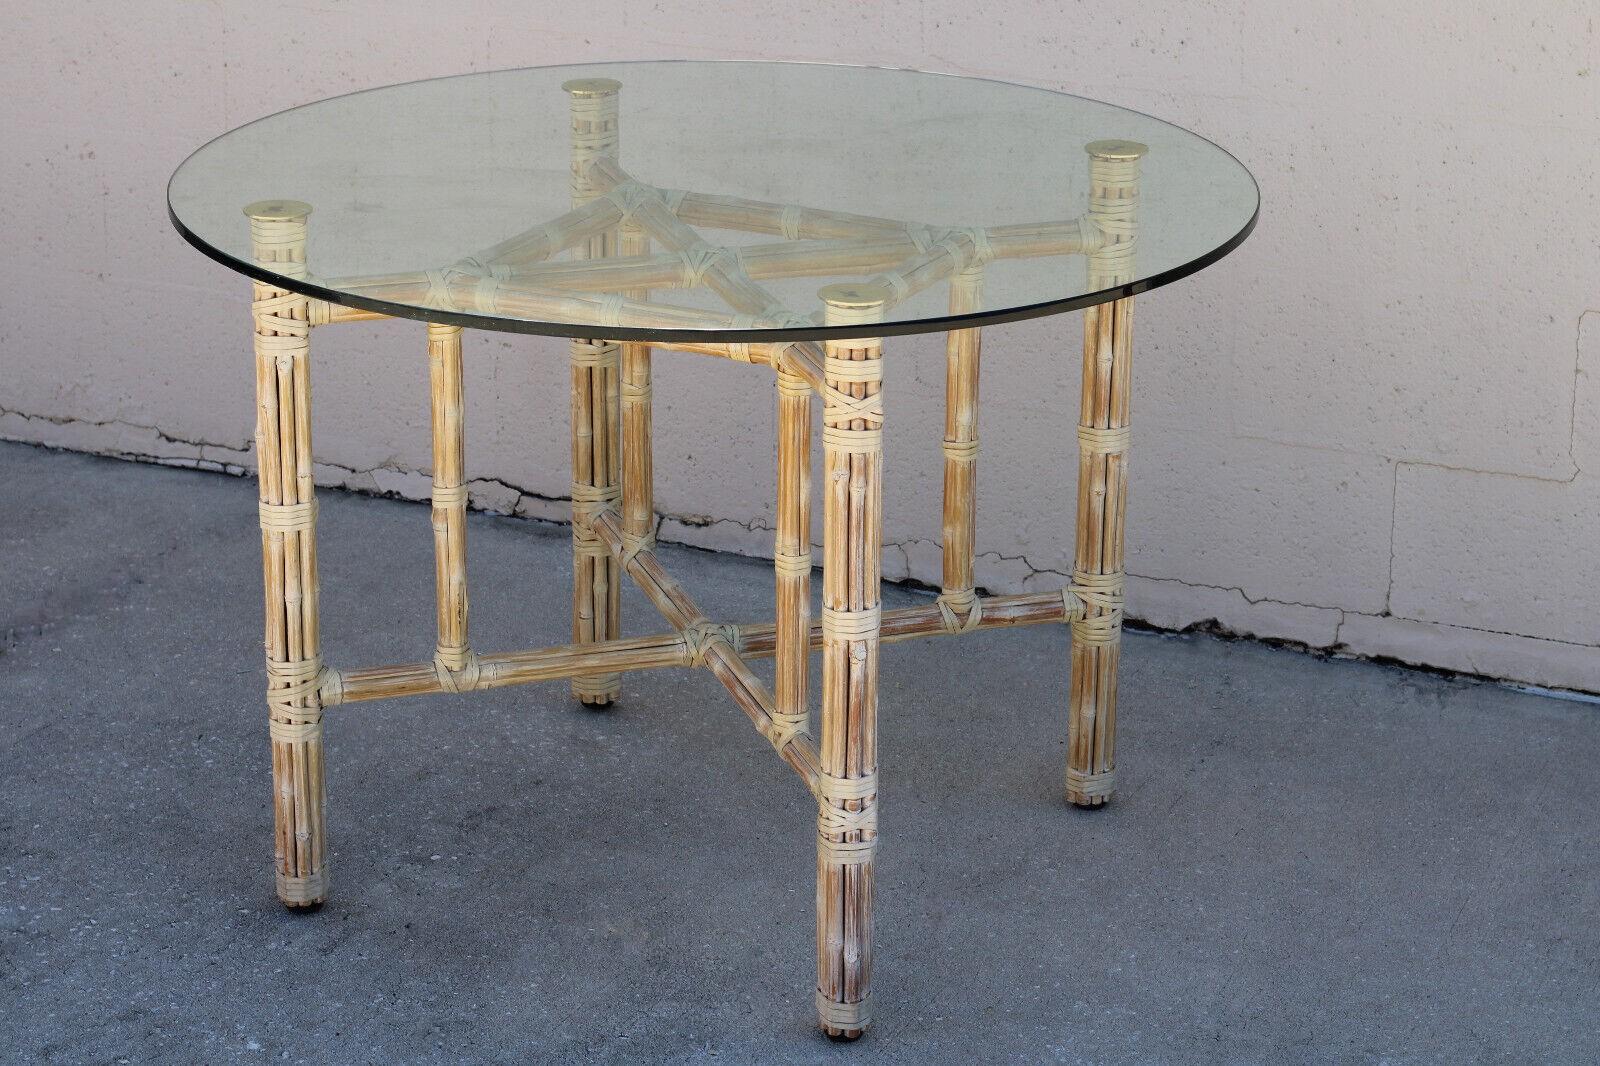 Genuine McGuire Bamboo Rattan Dining Table Base, for use with a Round or Square Glass Tabletop

Timeless design and excellent craftsmanship from McGuire, capturing the essence of casual luxury. This organic modern table base, from a design by John